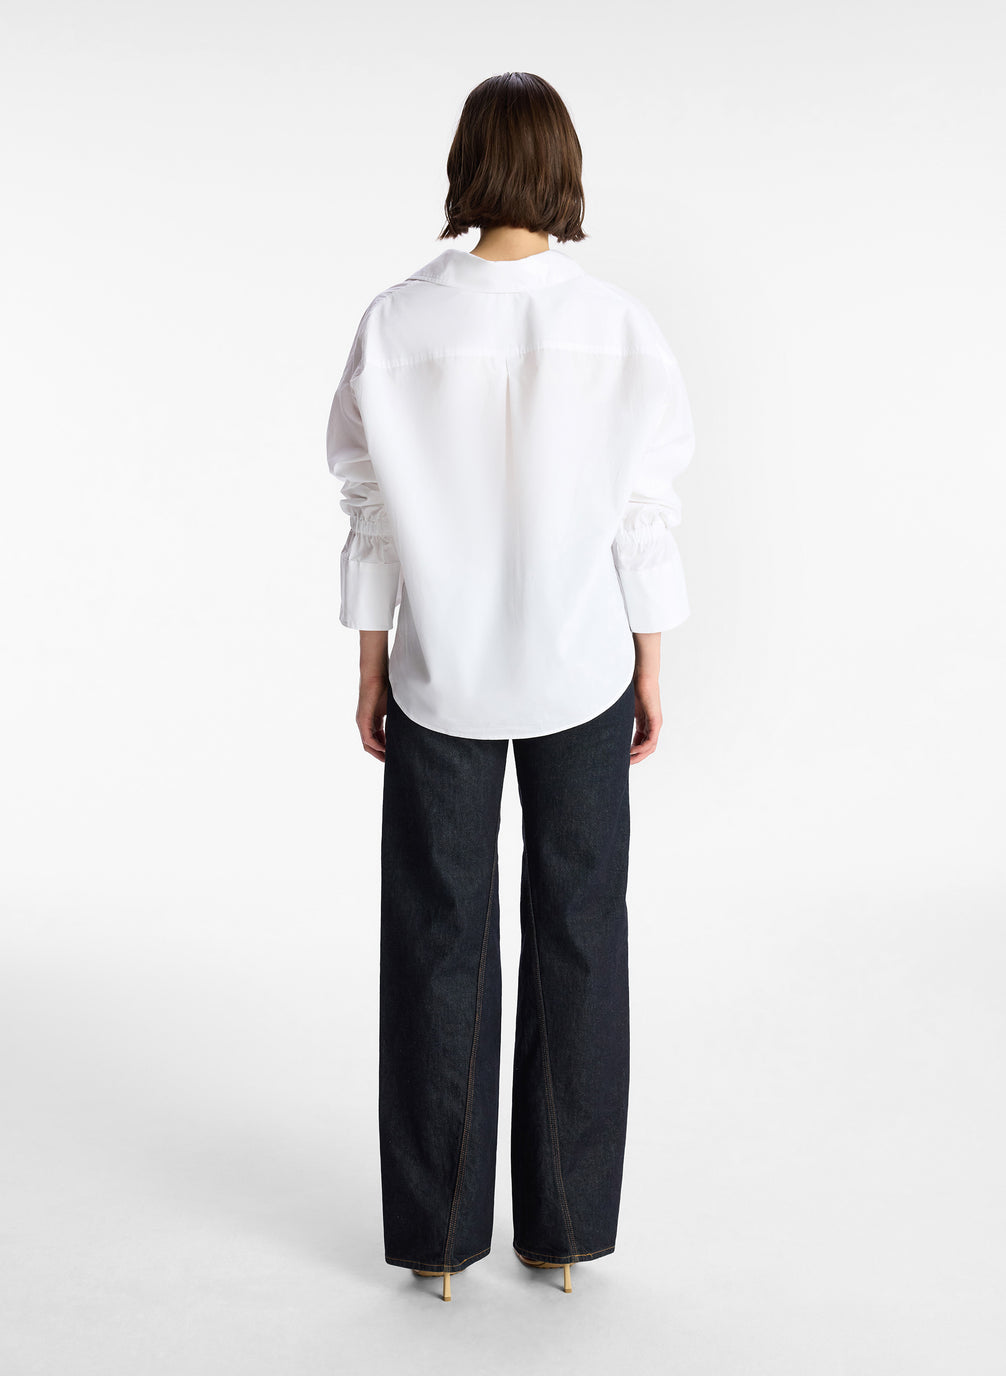 back view of woman wearing white oversized button down shirt and dark wash denim jeans